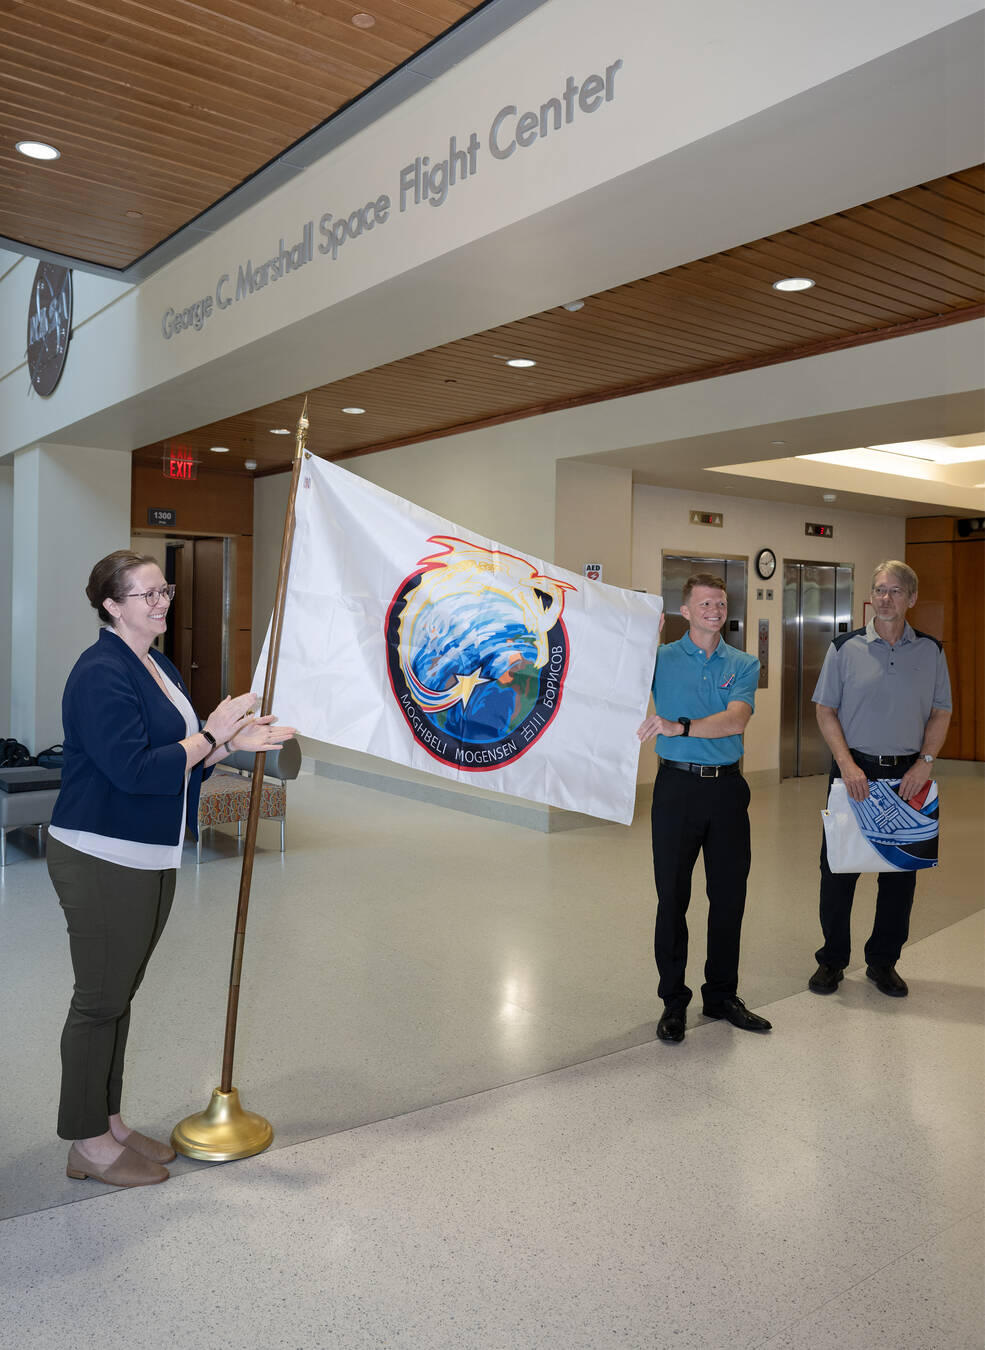 Marshalls commercial crew support team members display the Crew-7 flag in the lobby of Building 4221 on Aug. 23 during a ceremony ahead of the Crew-7 launch.